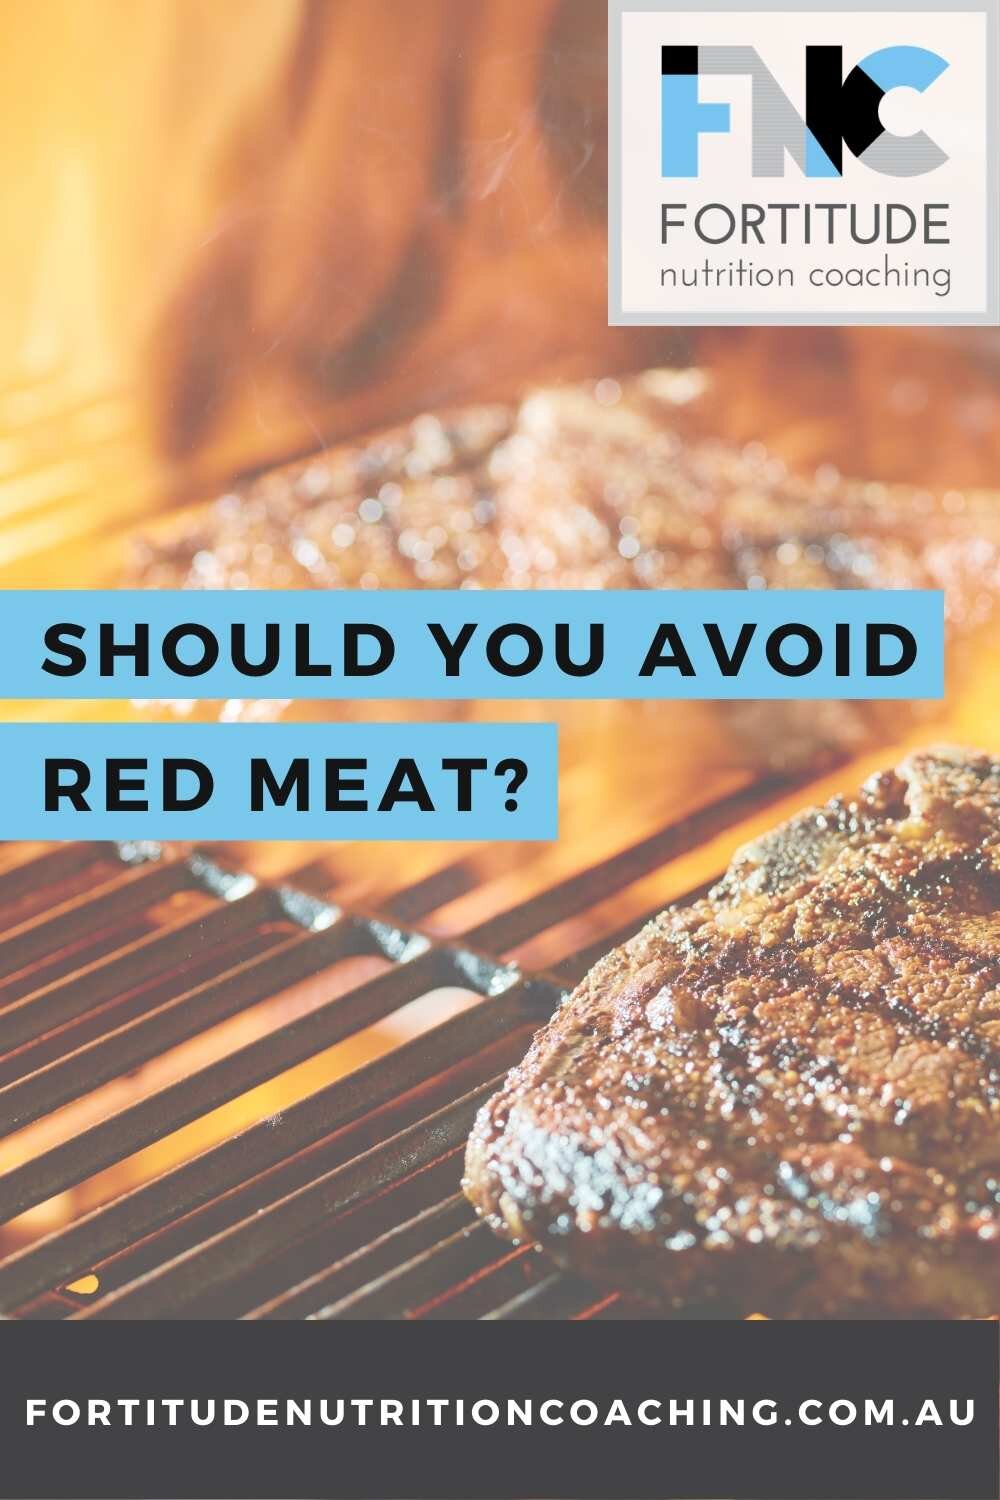 Fortitude Nutrition Coaching - Should You Avoid Red Meat?